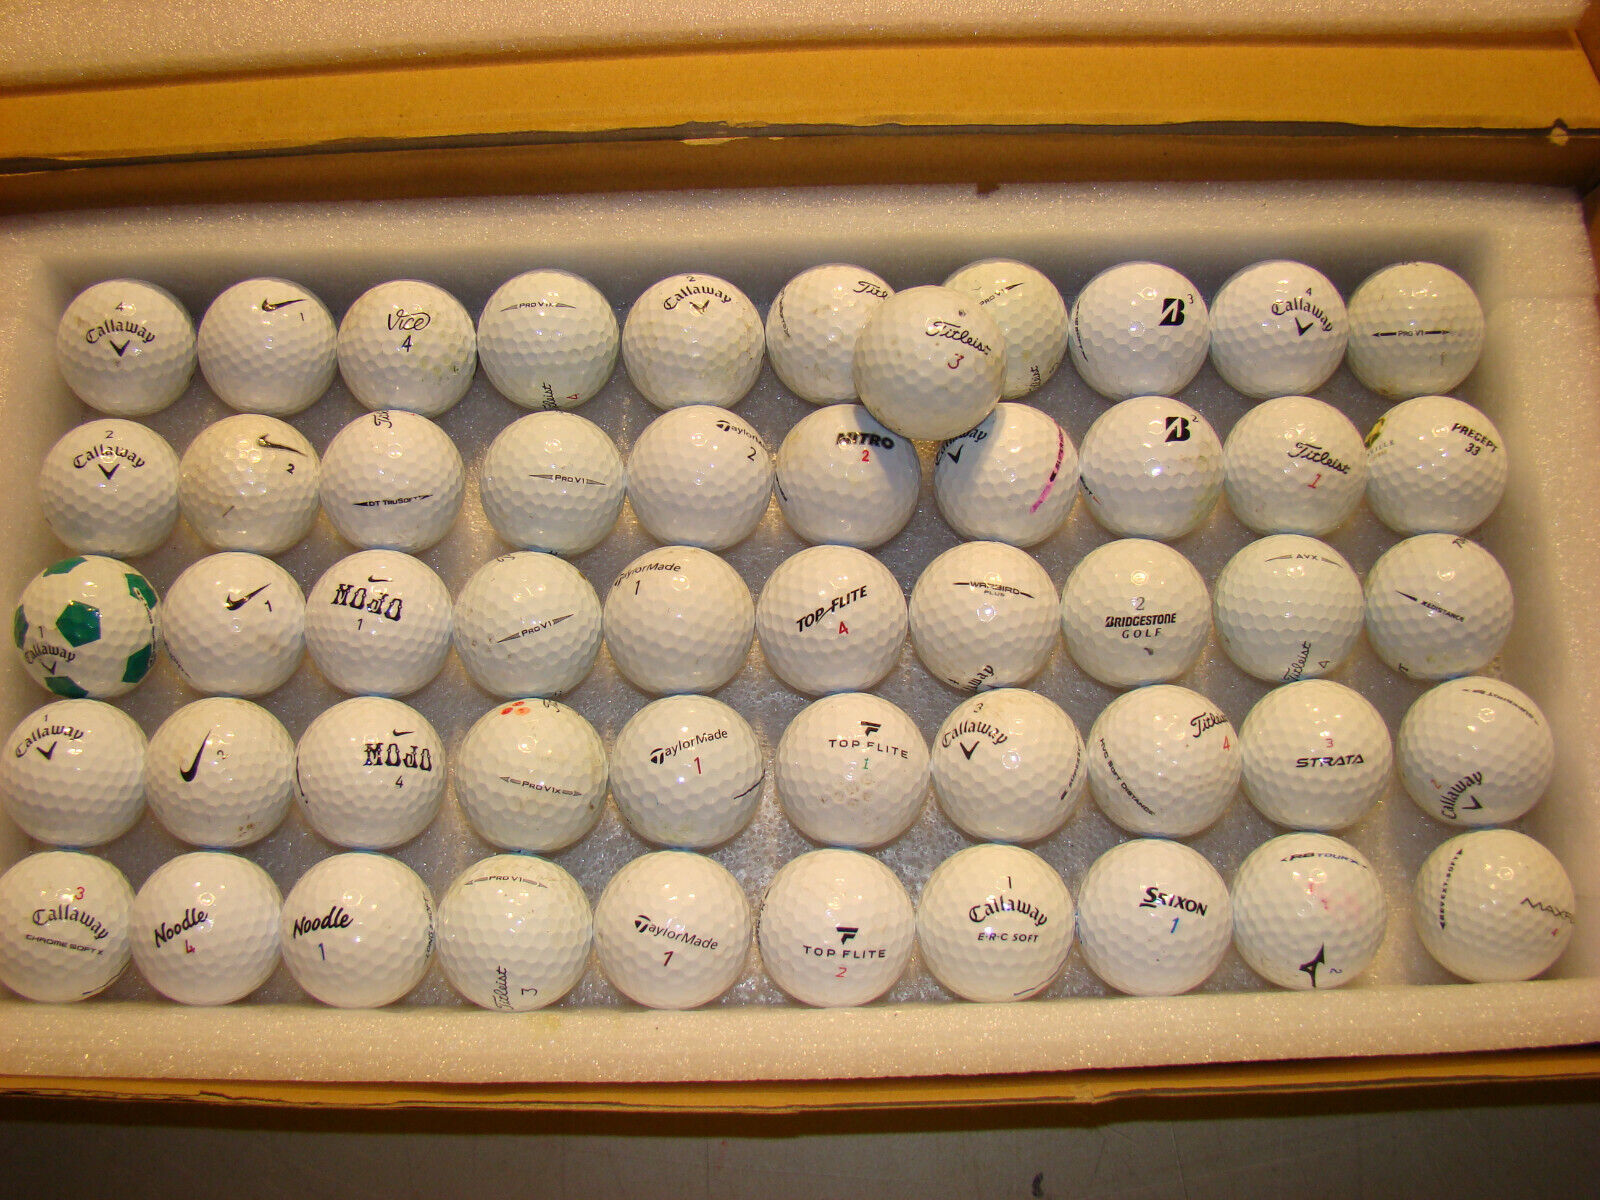 Used Mixed Lot of 50 Golf Balls Titleist Pro V1 Callaway Mojo Nike Noodle